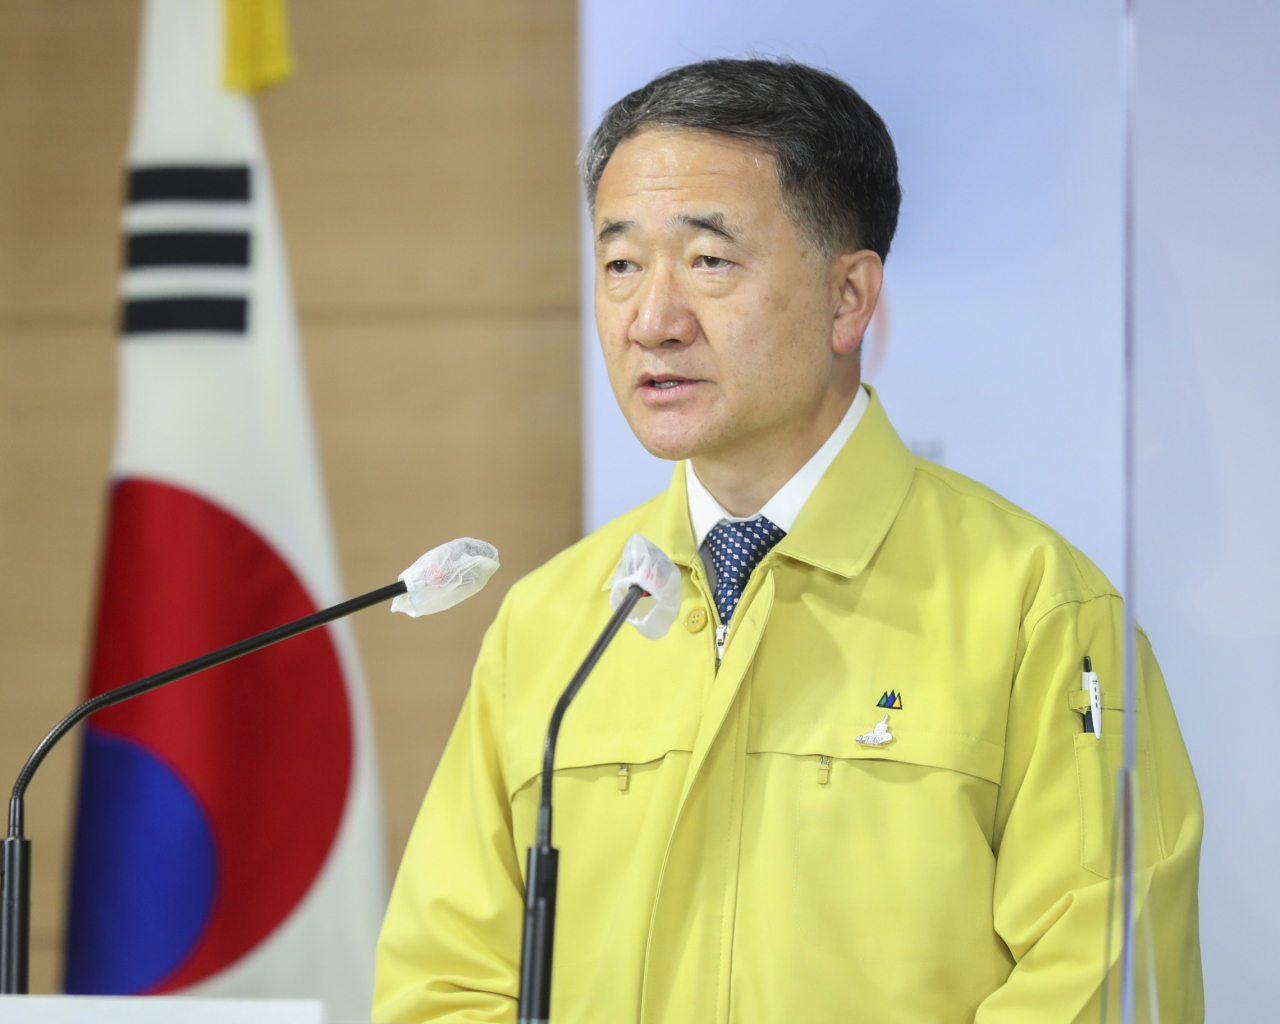 Minister of Health and Welfare Park Neung-hoo speaks during a press briefing on Sunday at the government complex building in Gwanghwamun, central Seoul. (Ministry of Health and Welfare)